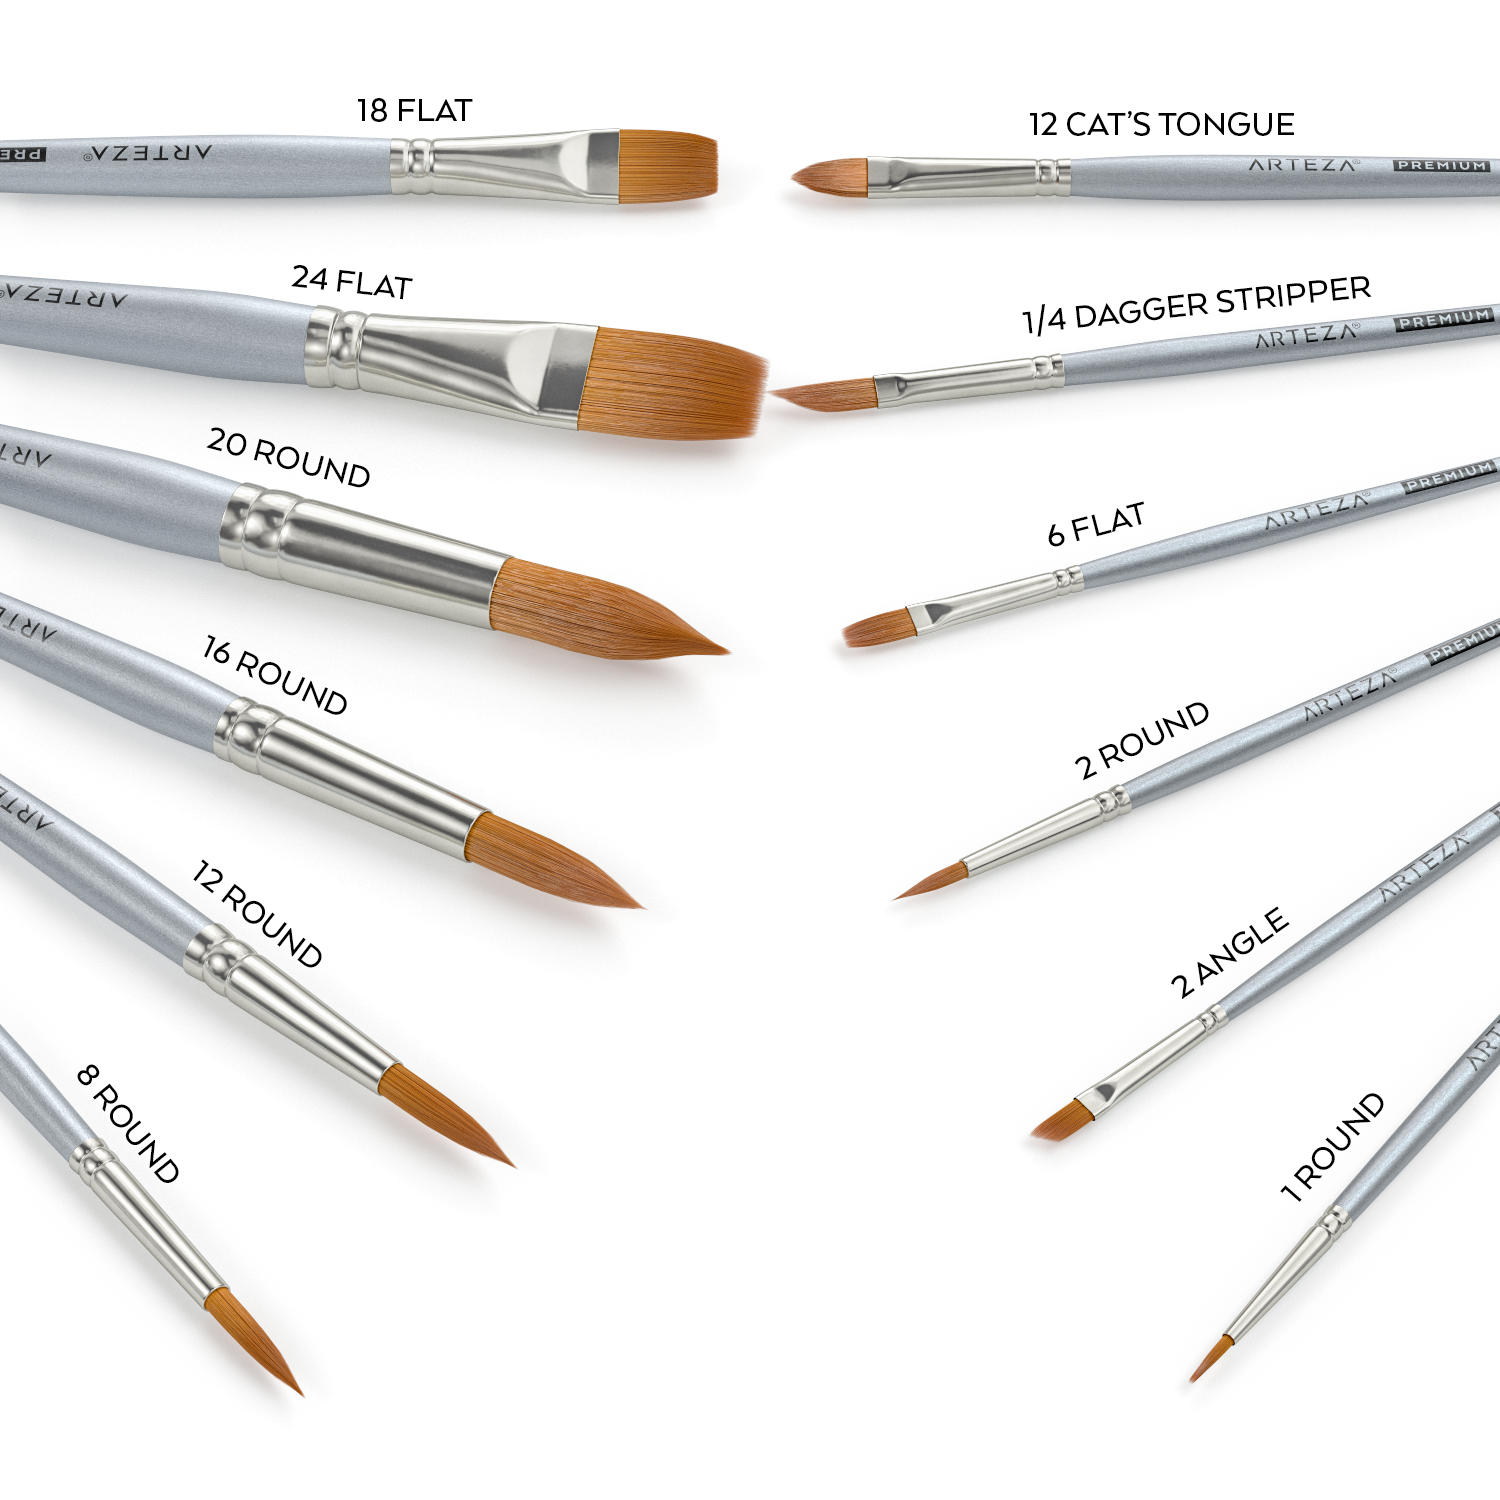 Buying watercolor brushes. How to buy watercolour brushes.